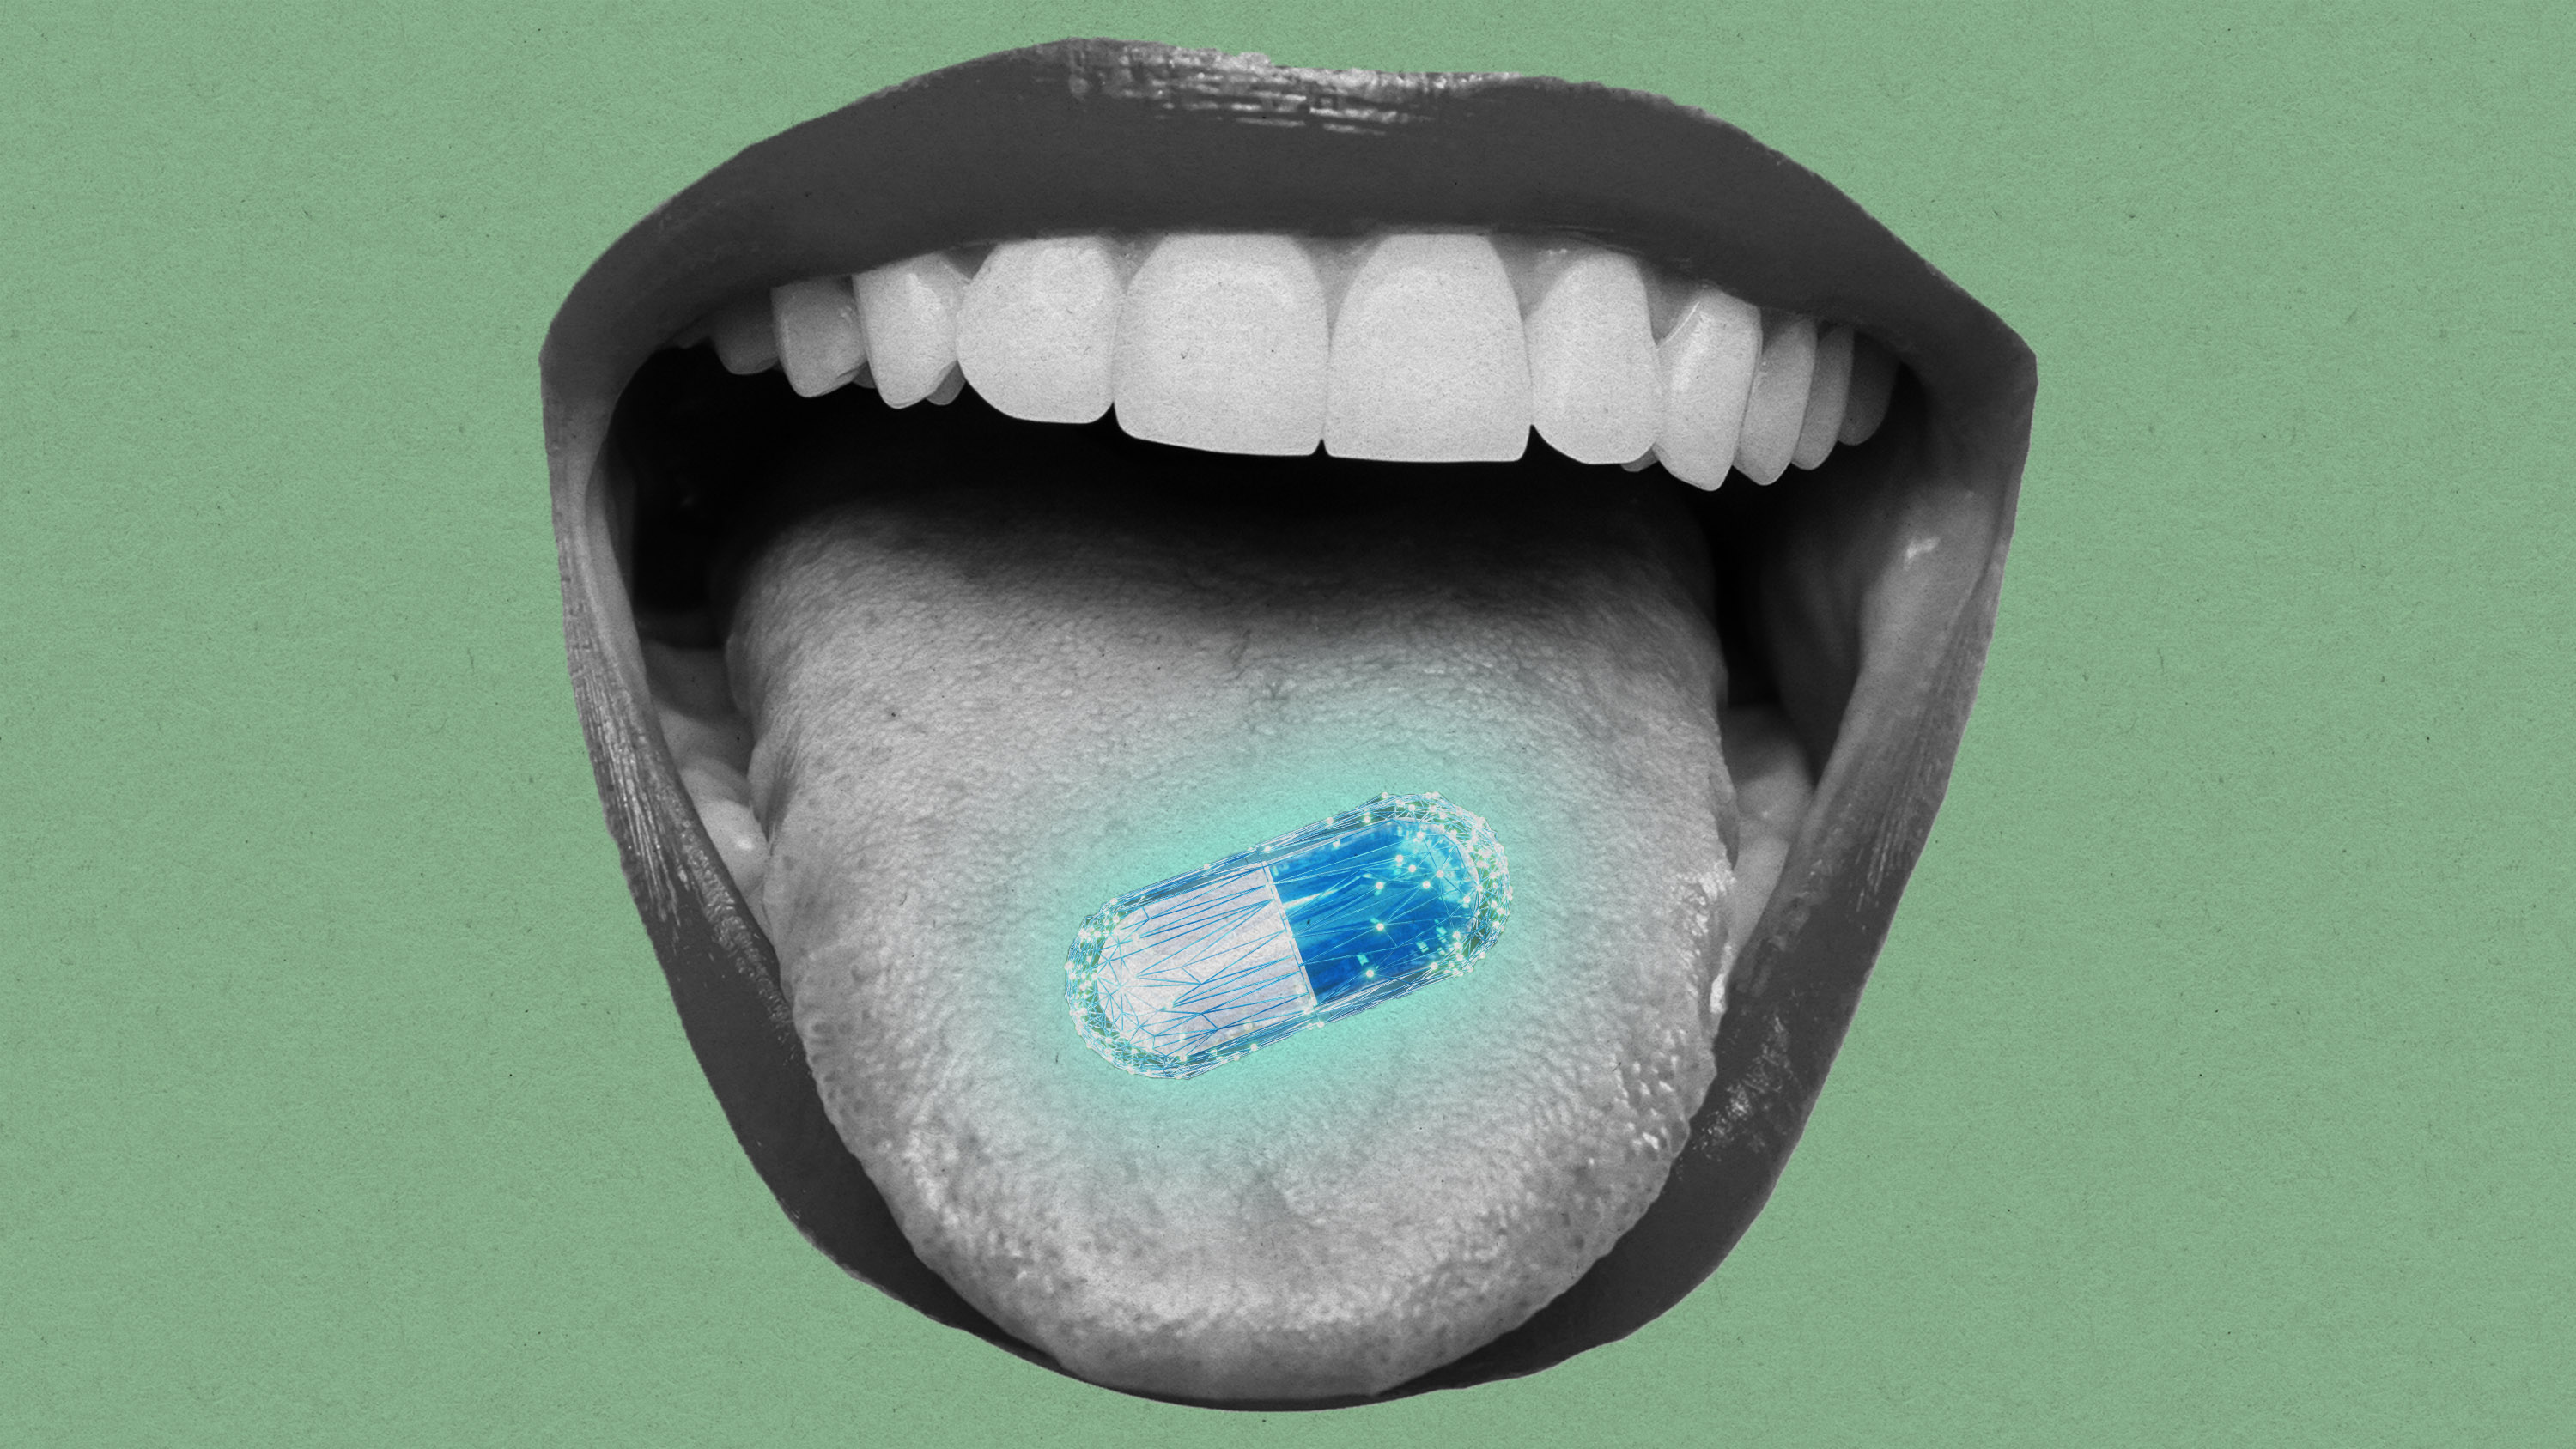 A photo illustration concept shows a mouth with a digital pill on the tongue.